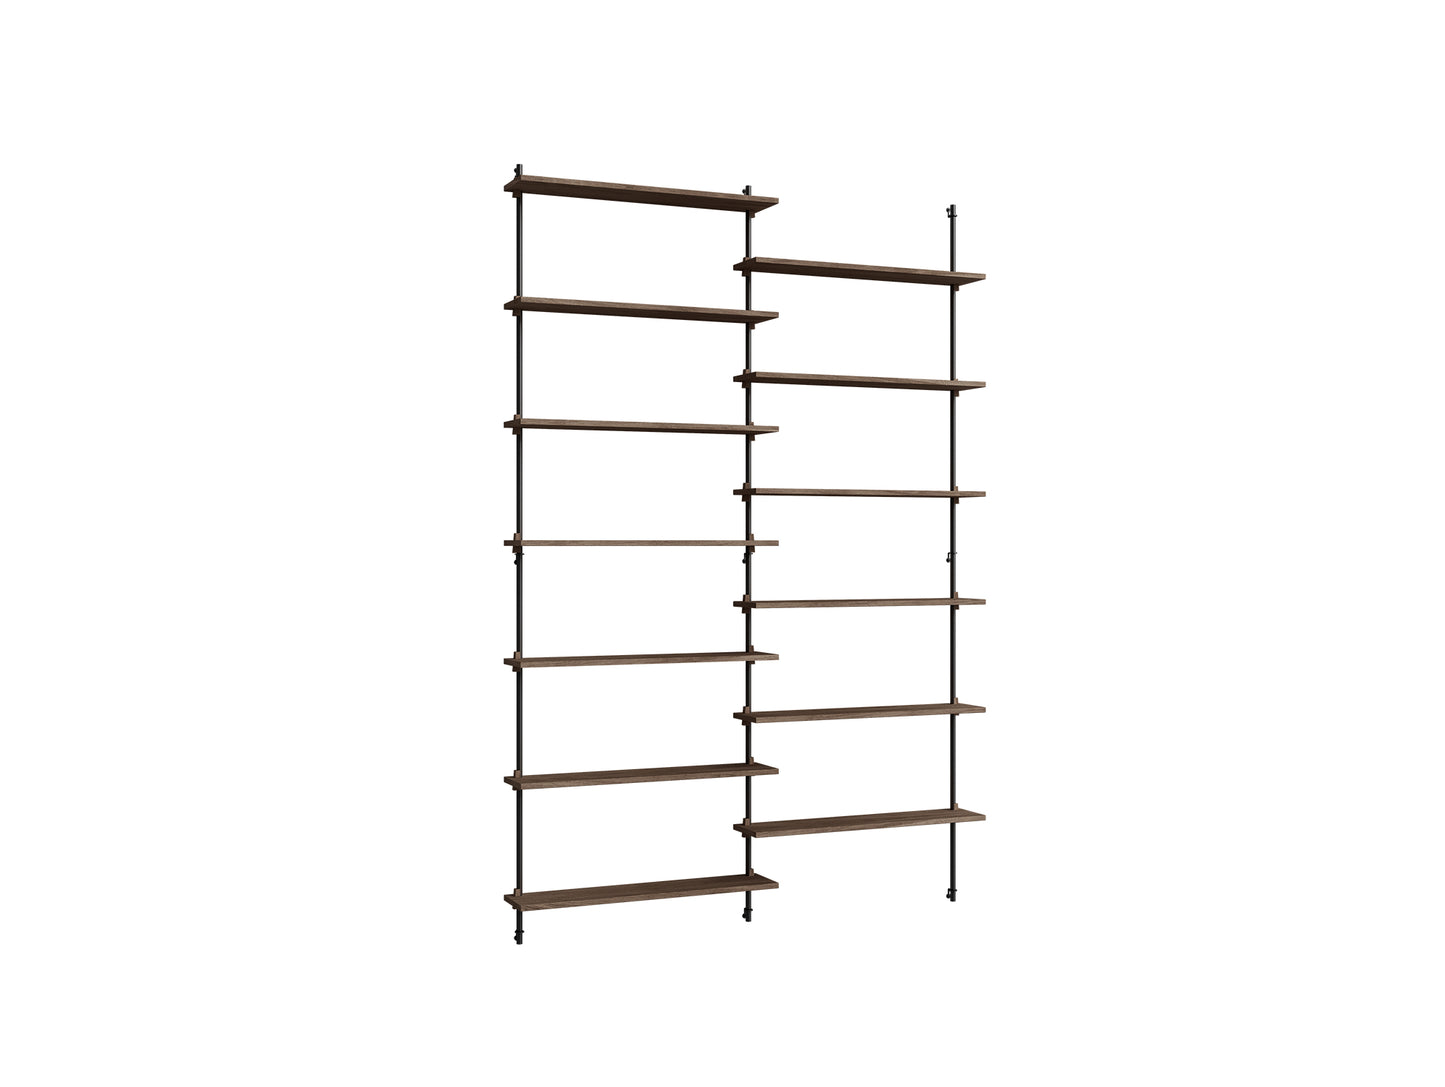 Wall Shelving System Sets (230 cm) by Moebe - WS.230.2 / Black Uprights / Smoked Oak